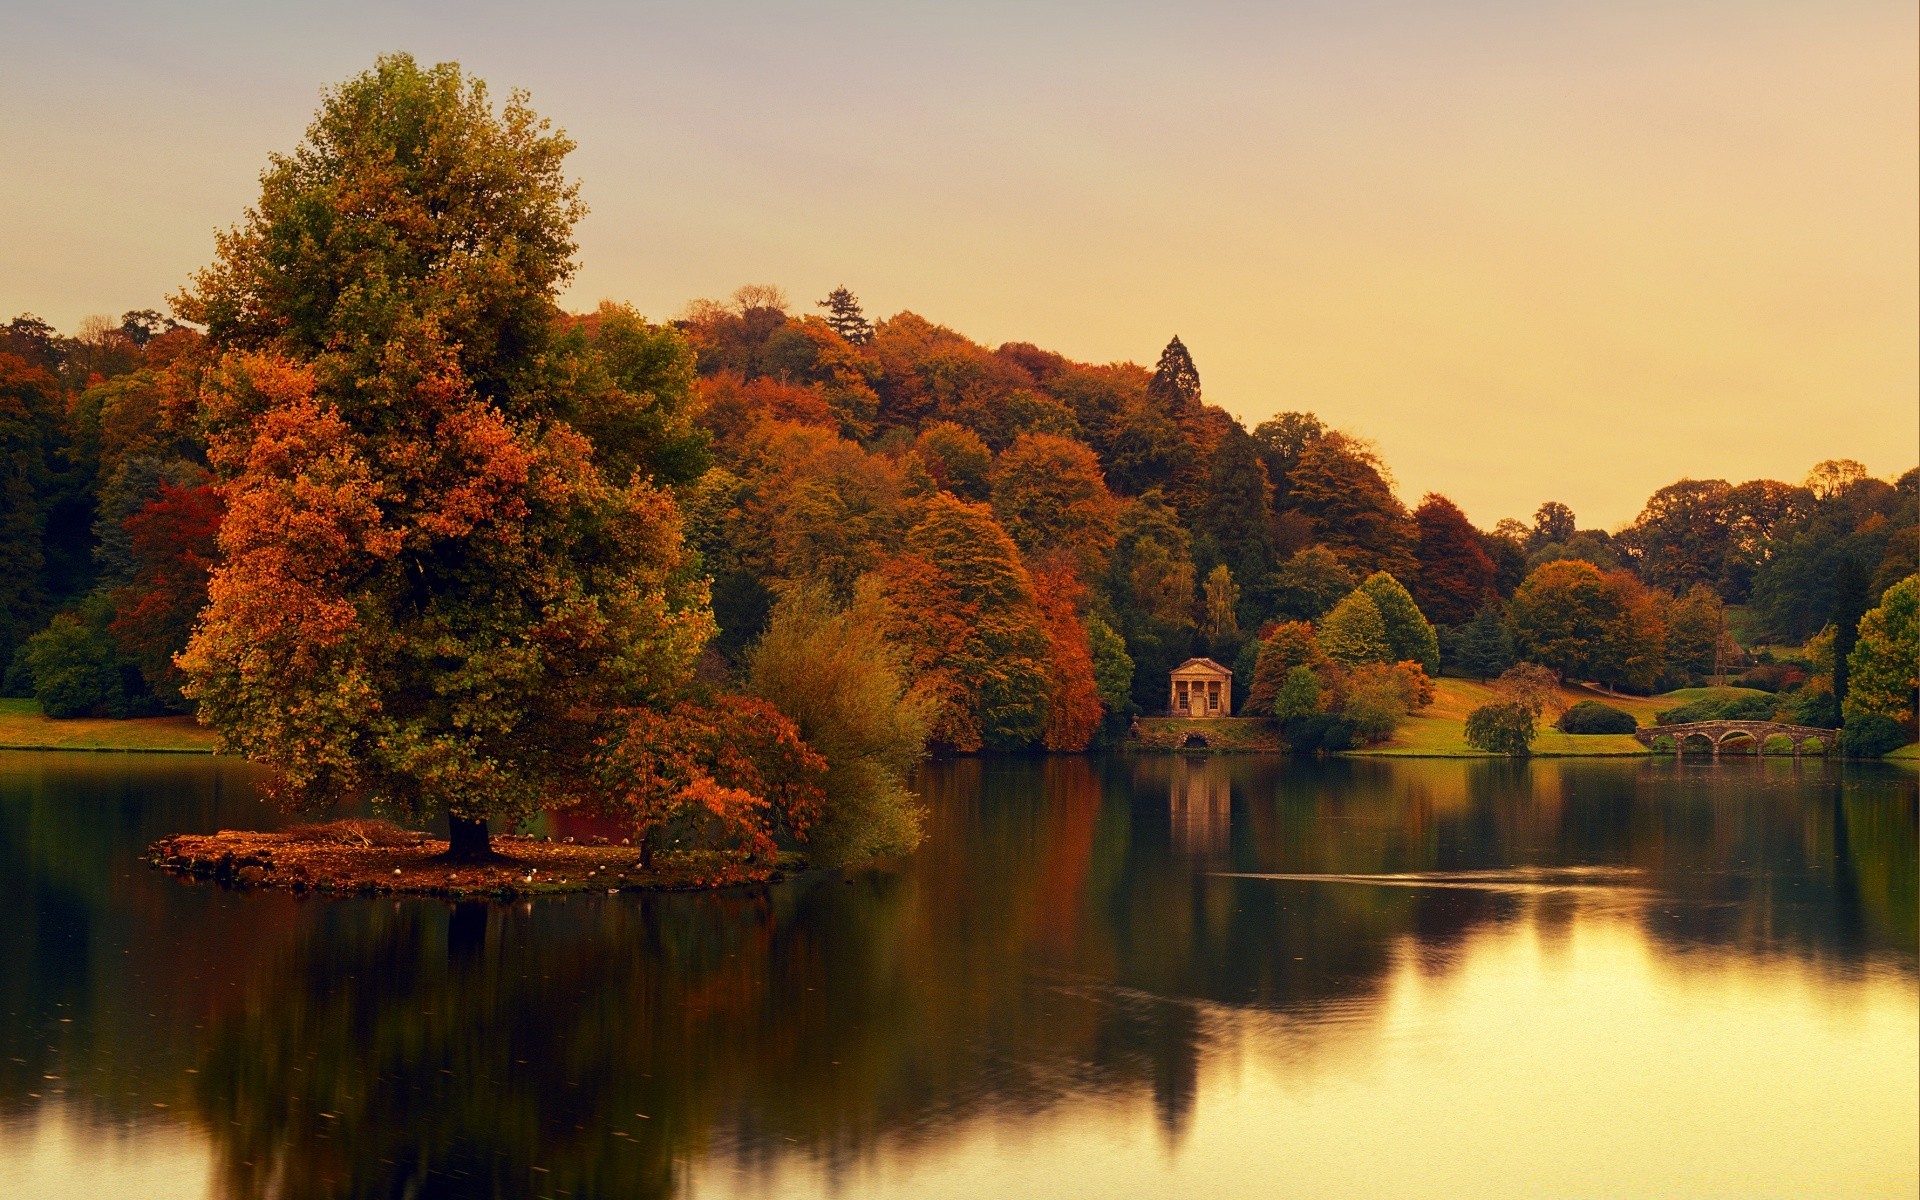 europe water lake dawn fall tree sunset river reflection outdoors nature landscape placid composure evening wood sky leaf sun travel